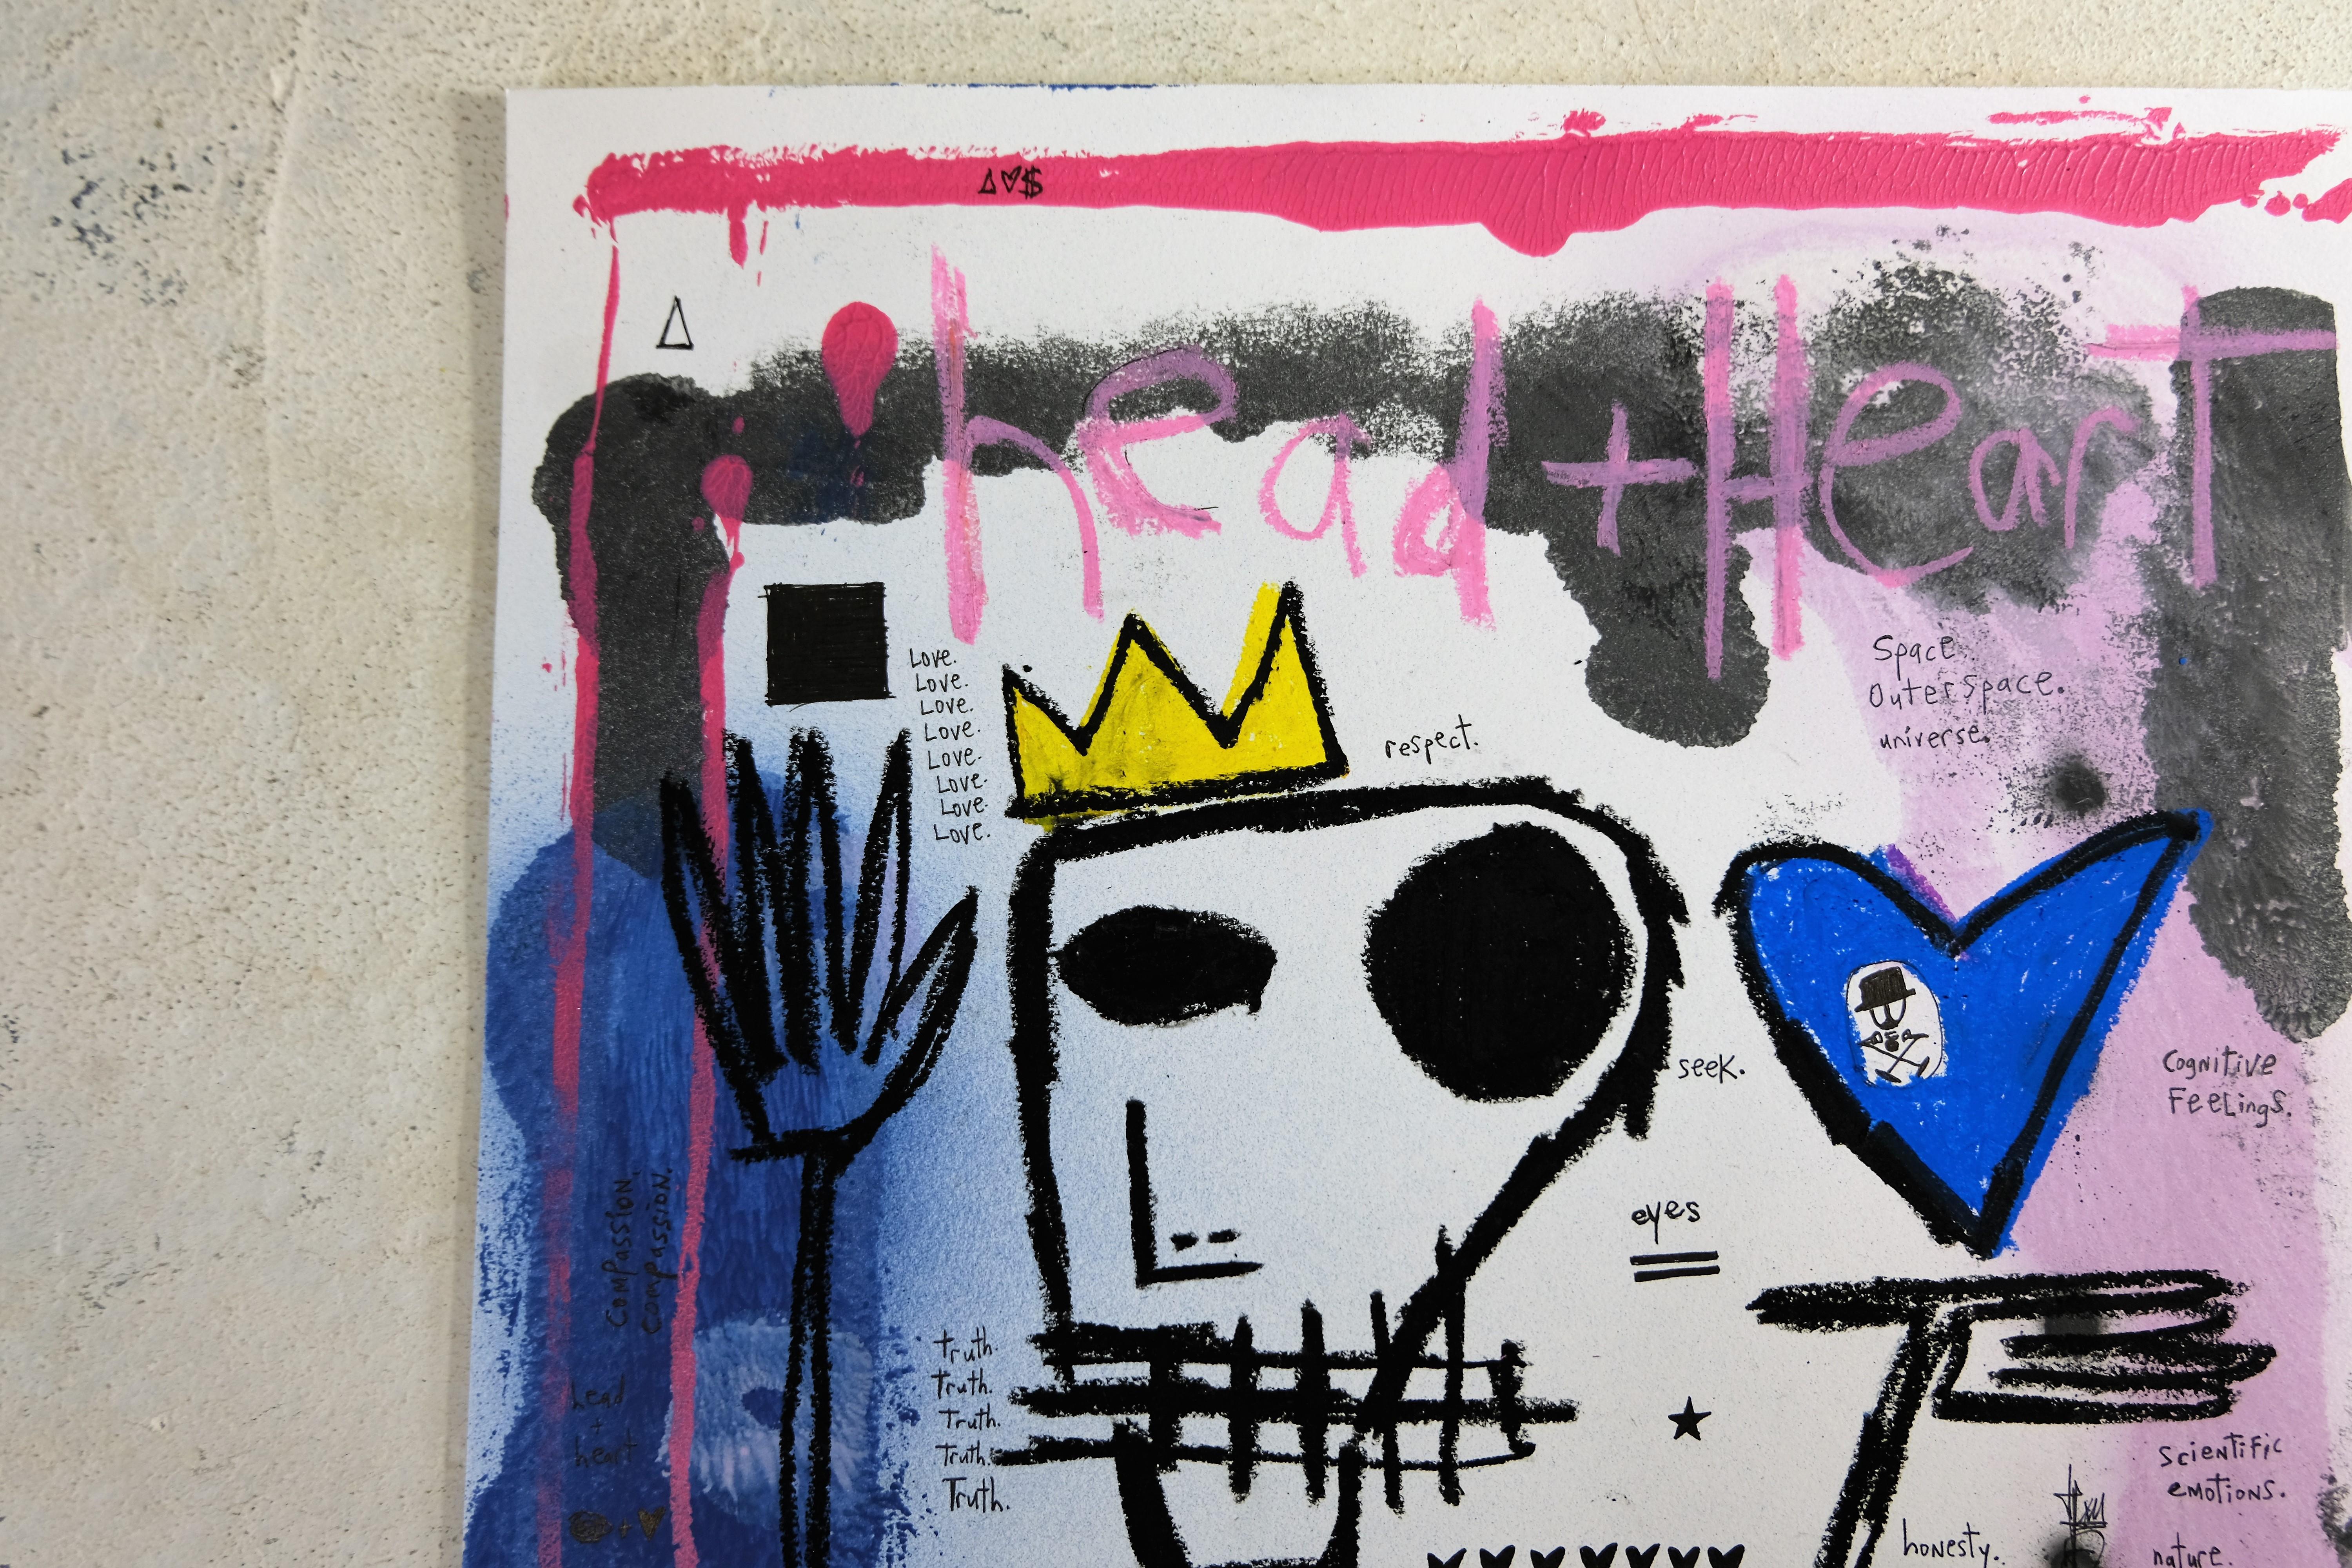 Head & Heart
Mixed Media on Paper
Graffiti / Street Art influenced.

About the artist:
Adam Baranello is a multi- media artist who has been making music and art professionally since 2005 under his own label, AJB Productions which has produced 8